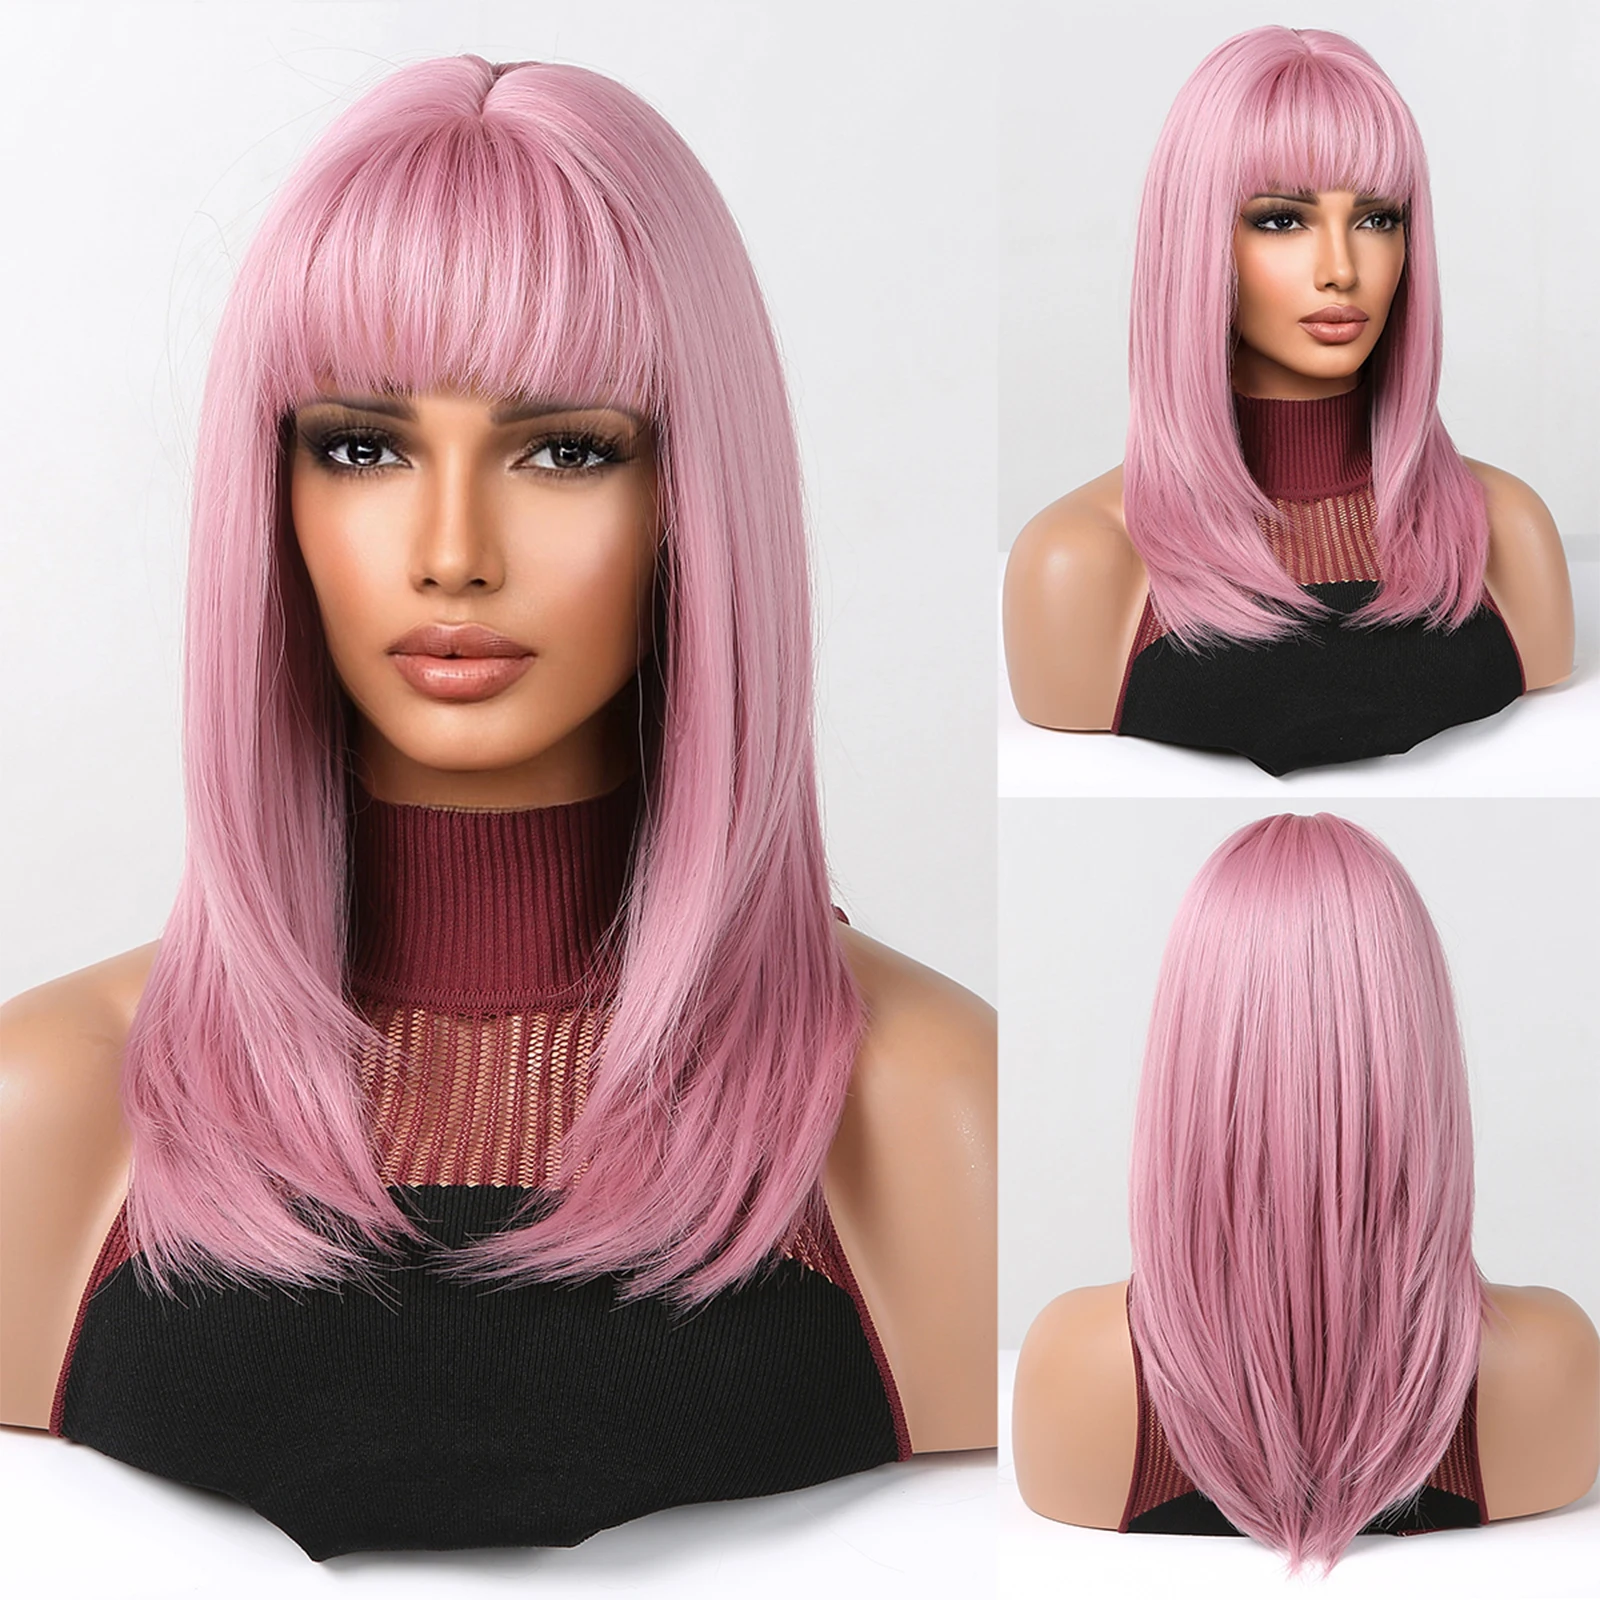 EASIHAIR Medium Length Pink Bangs Wig Layered Straight Synthetic Wig for Women Colorful Cosplay Party Lolita Heat Resistant Hair